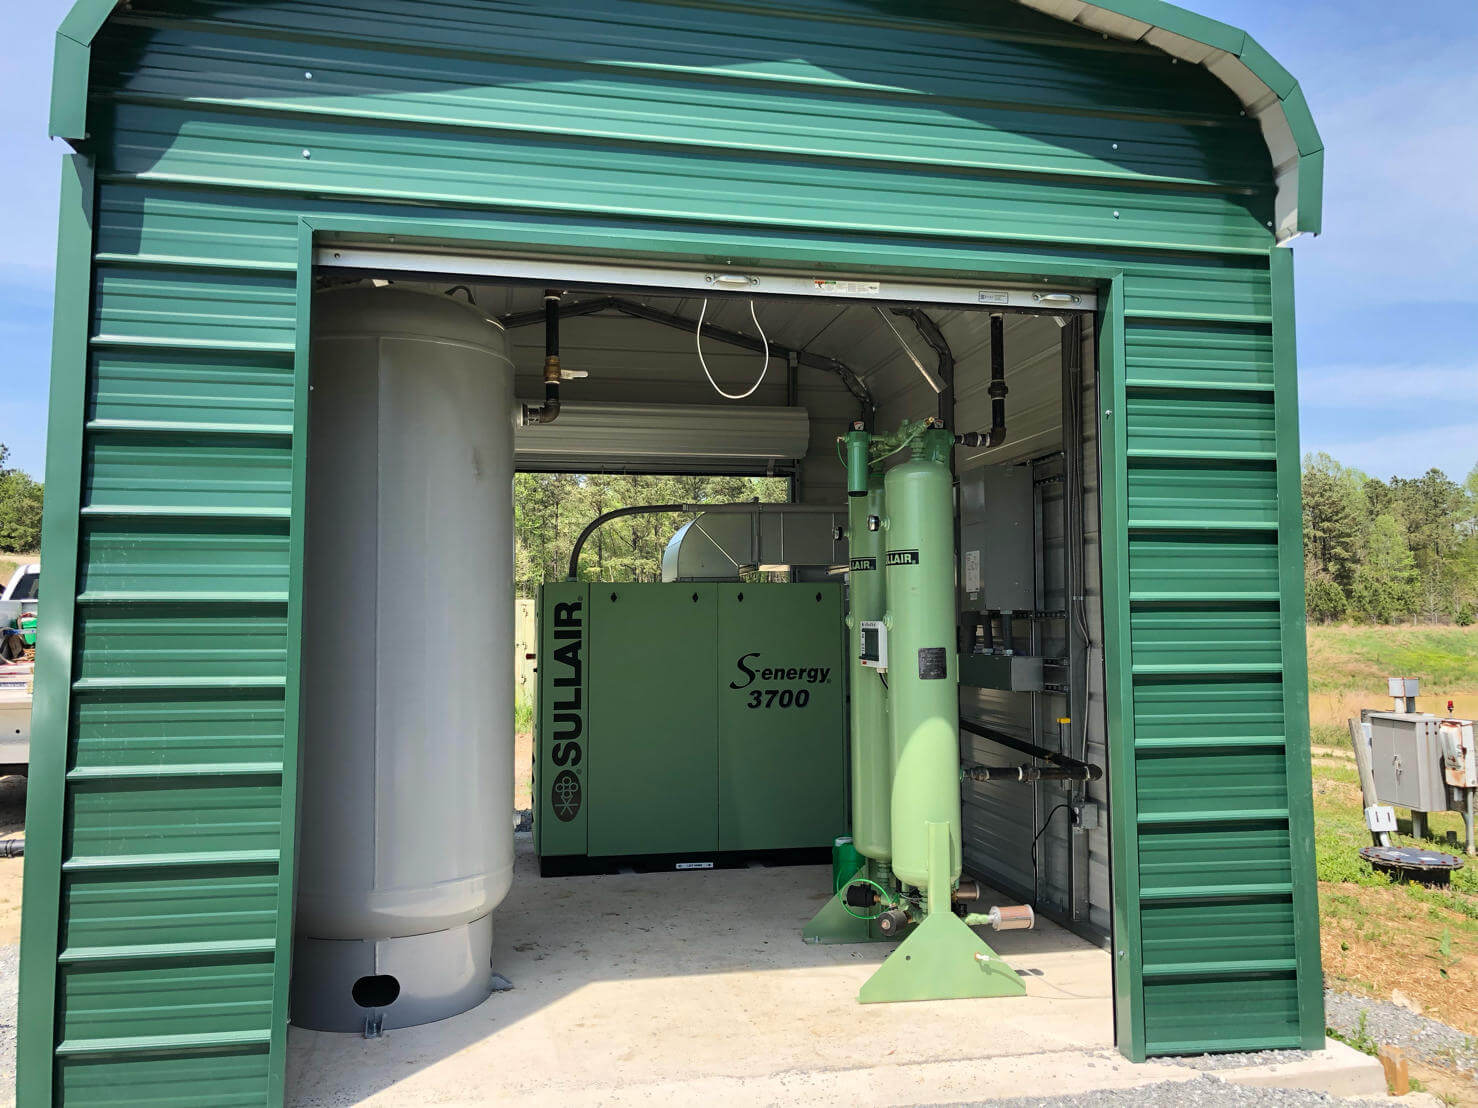 2-50 HP Sullair S-energy air compressors and heatless desiccant dryers for a large landfill in Virginia that needed an upgrade due to continuing expansion.